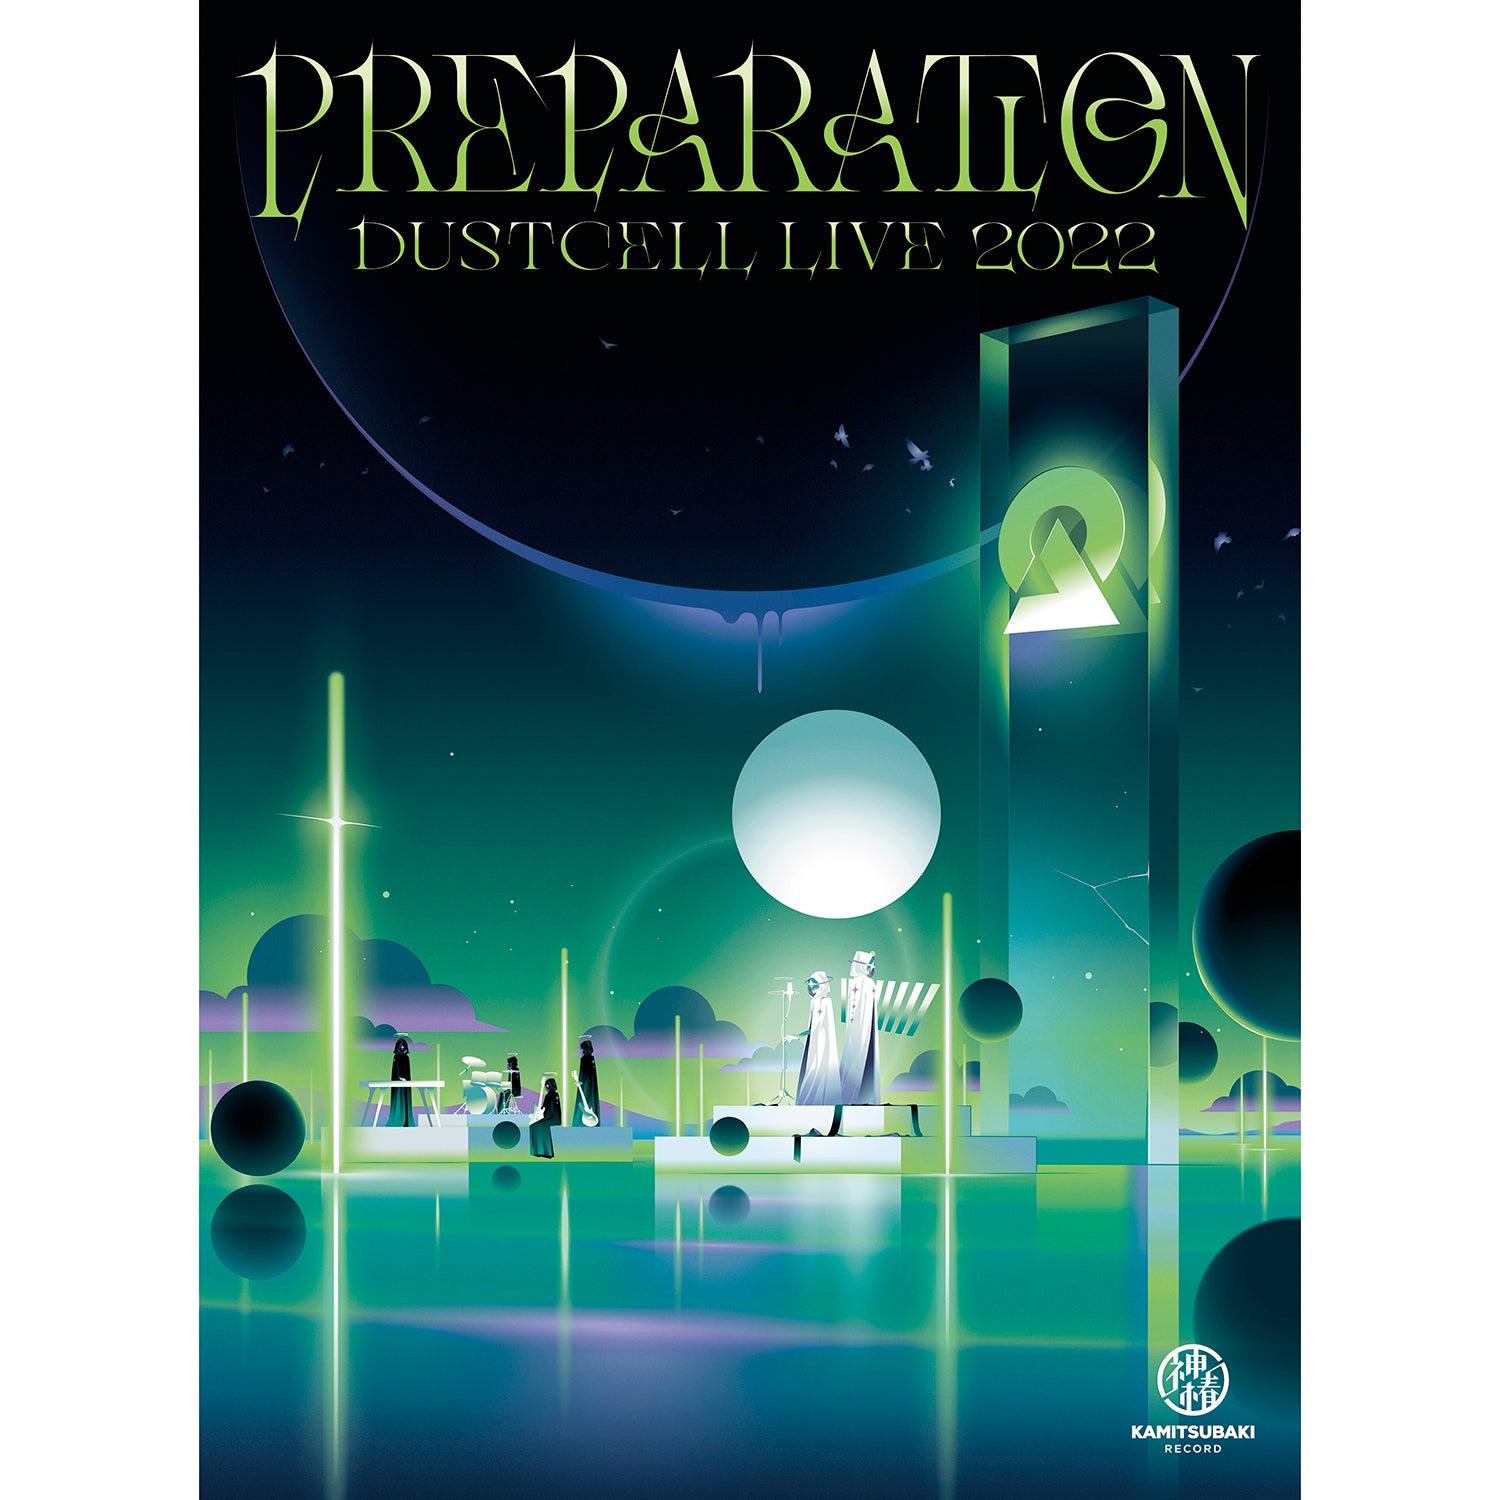 DUSTCELL LIVE 2022「PREPARATION 」blu-ray本・音楽・ゲーム